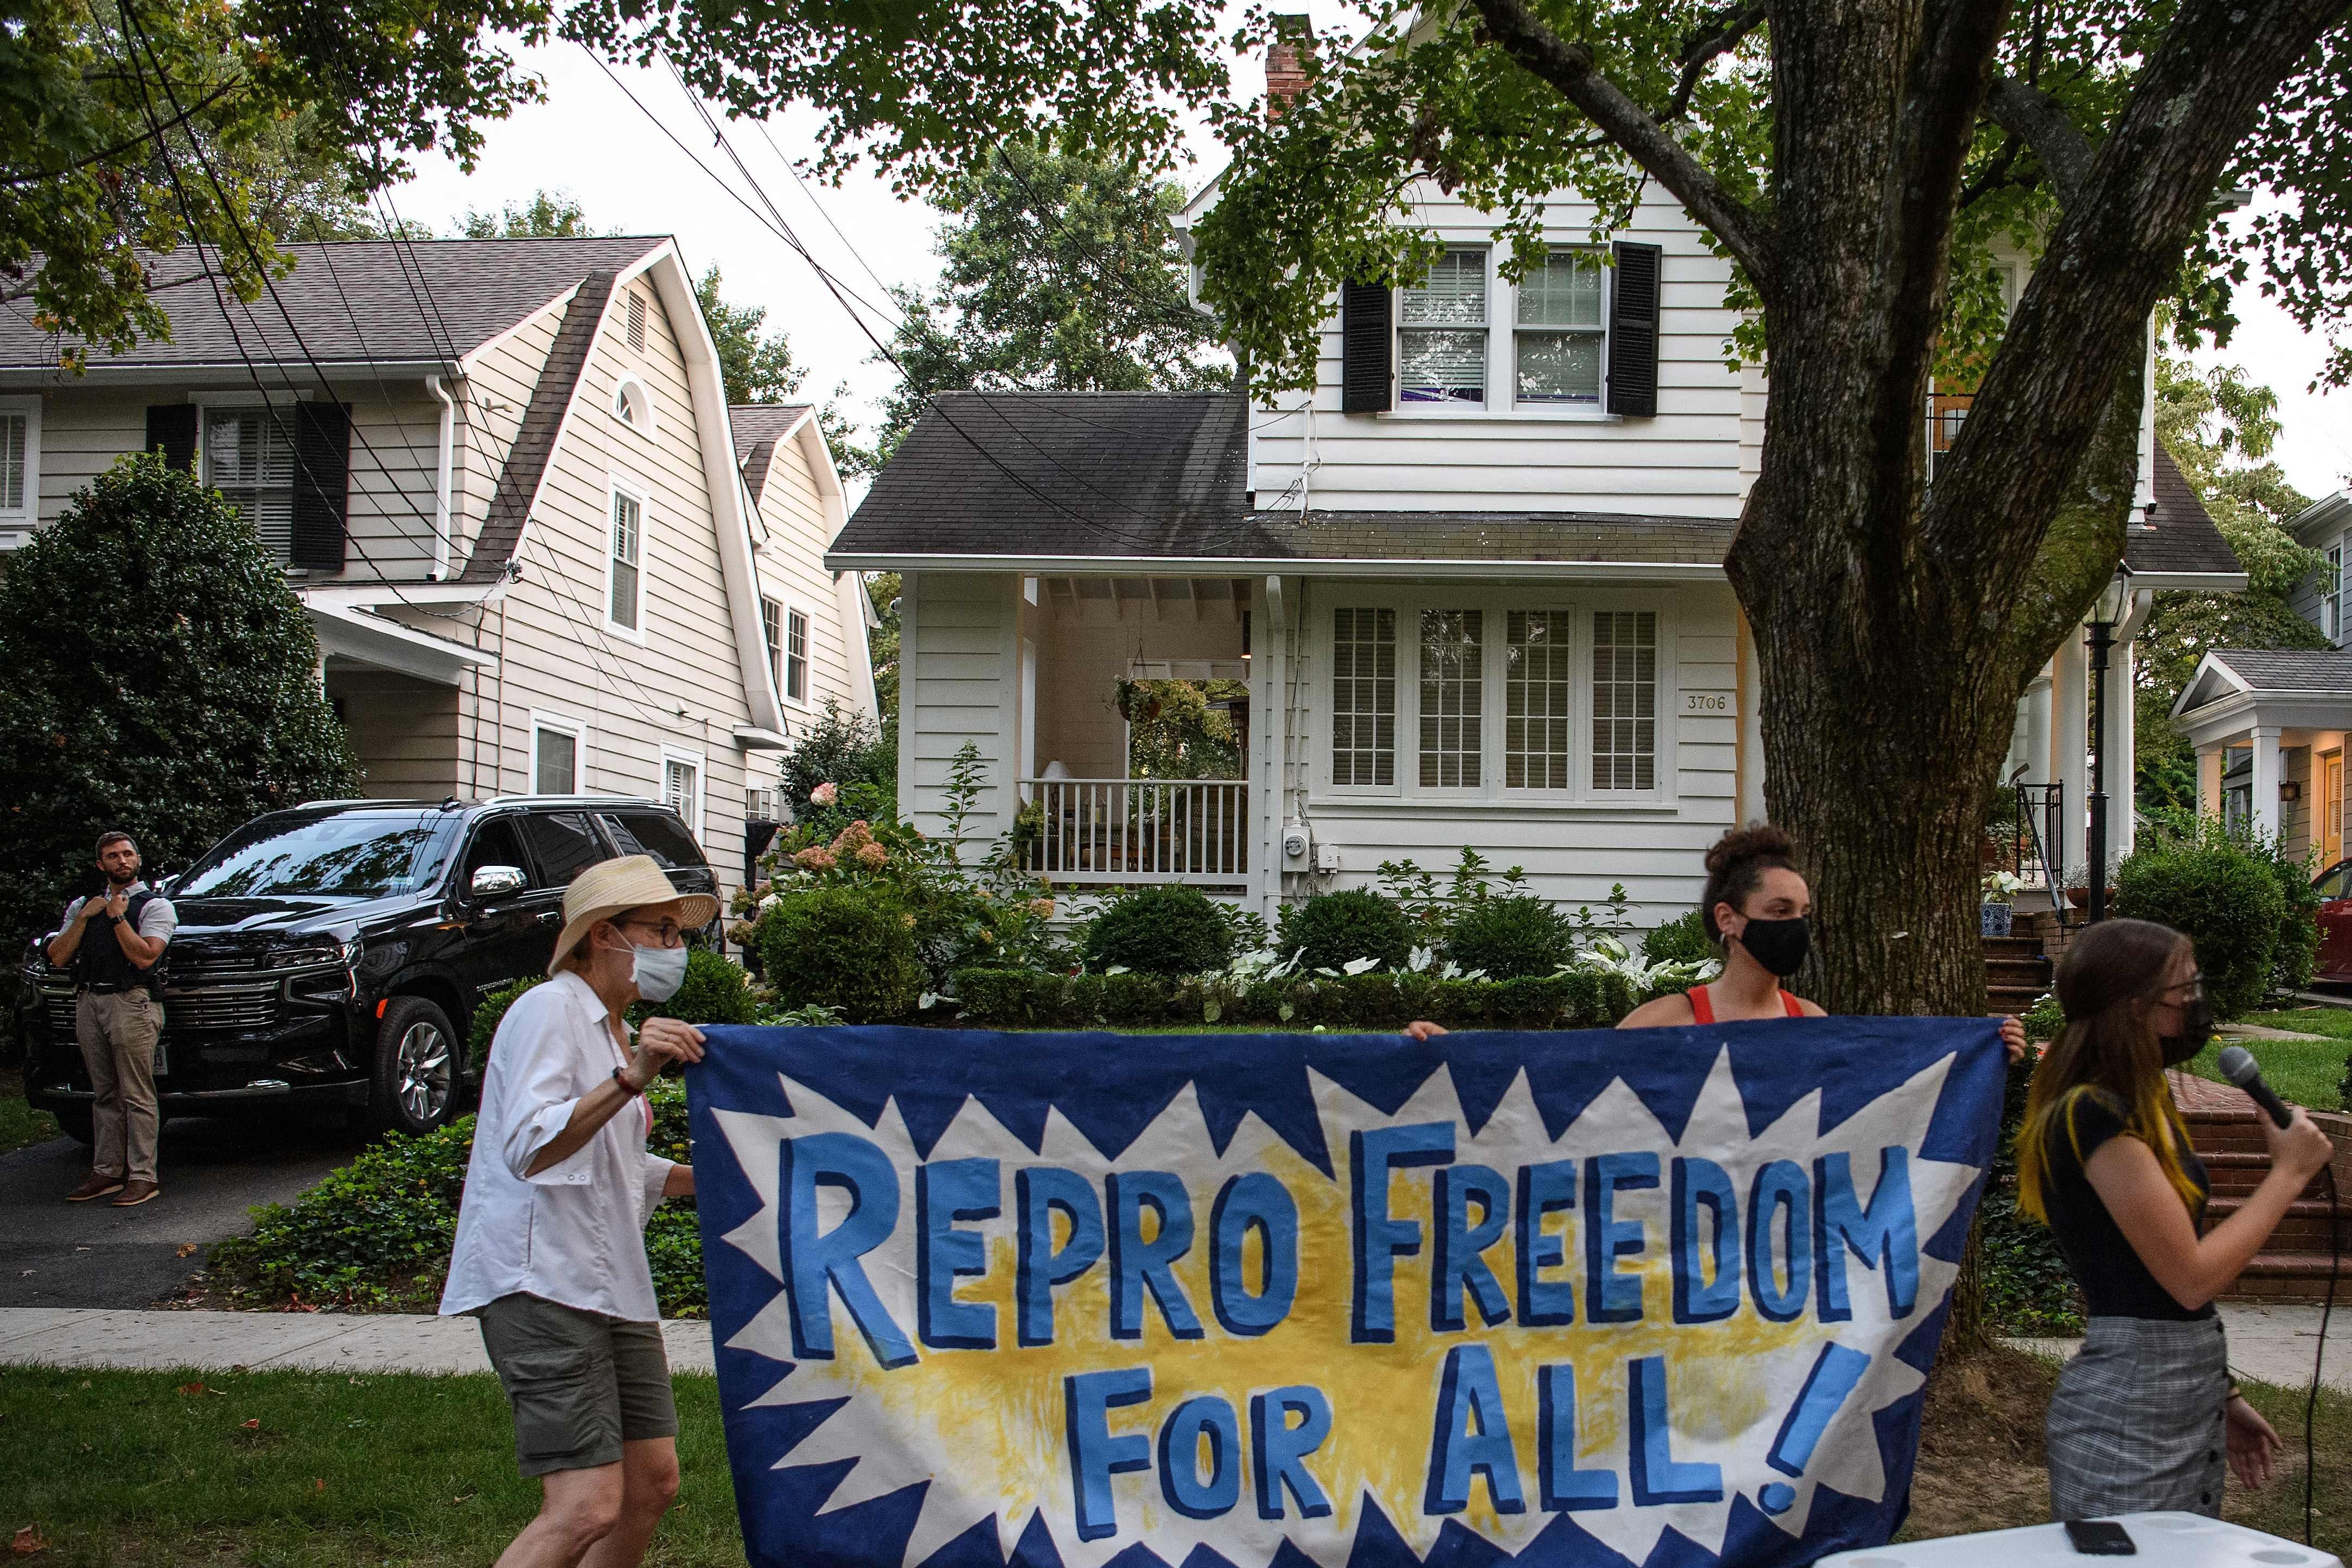 Two people hold up a sign that says "Repro Freedom for All!" as another person speaks into a mic on a suburban street